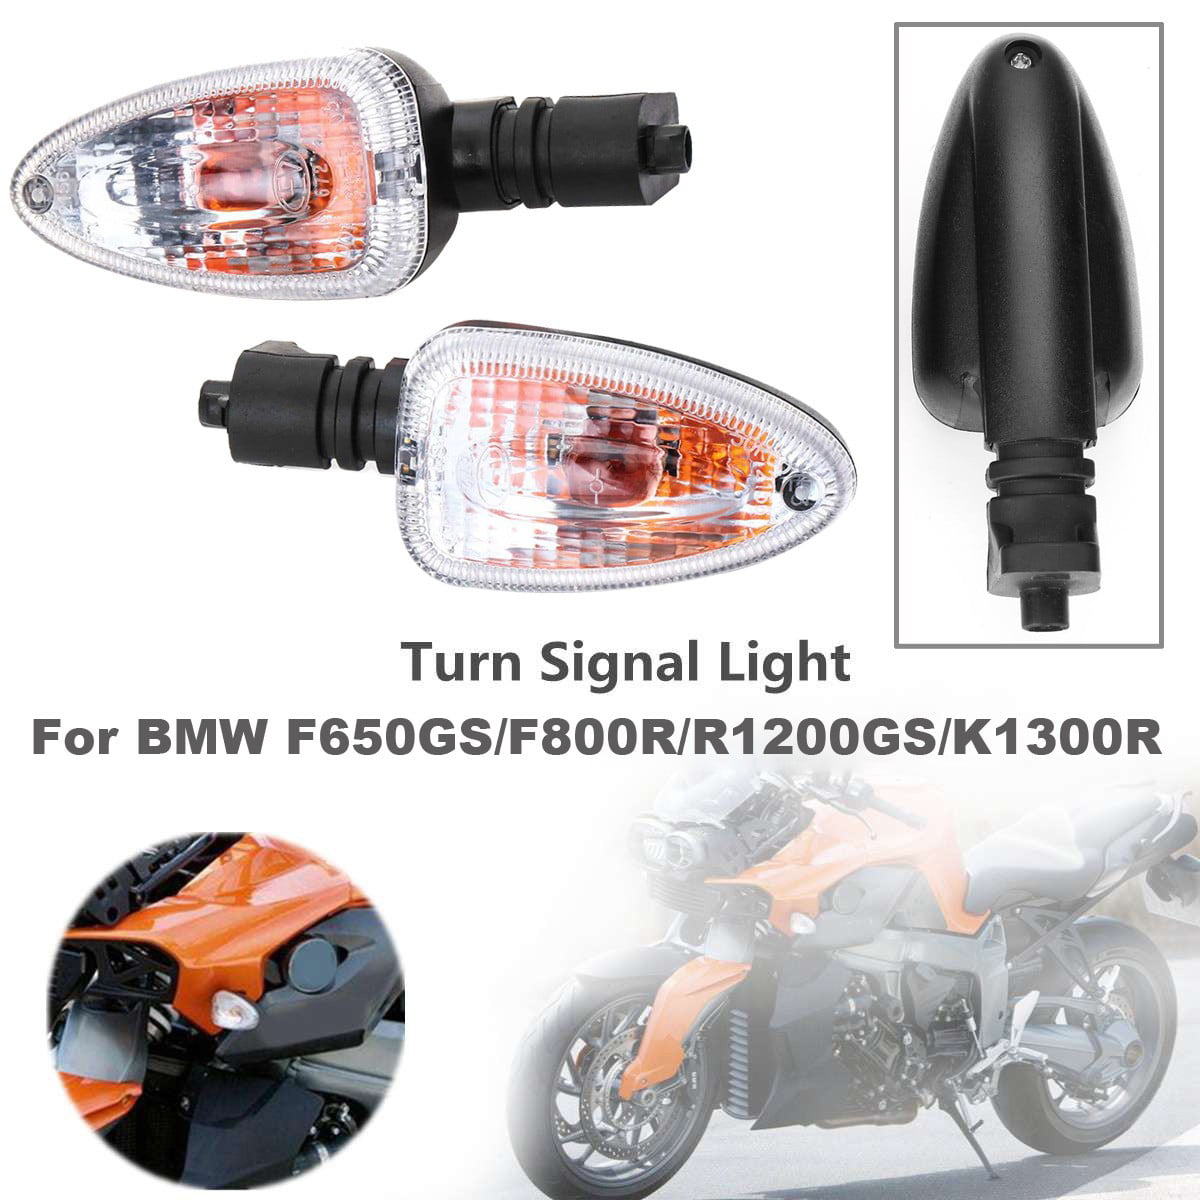 Pair Turn Signal Light Blinker Indicator for BMW F800R R1200GS F650GS Front Rear 